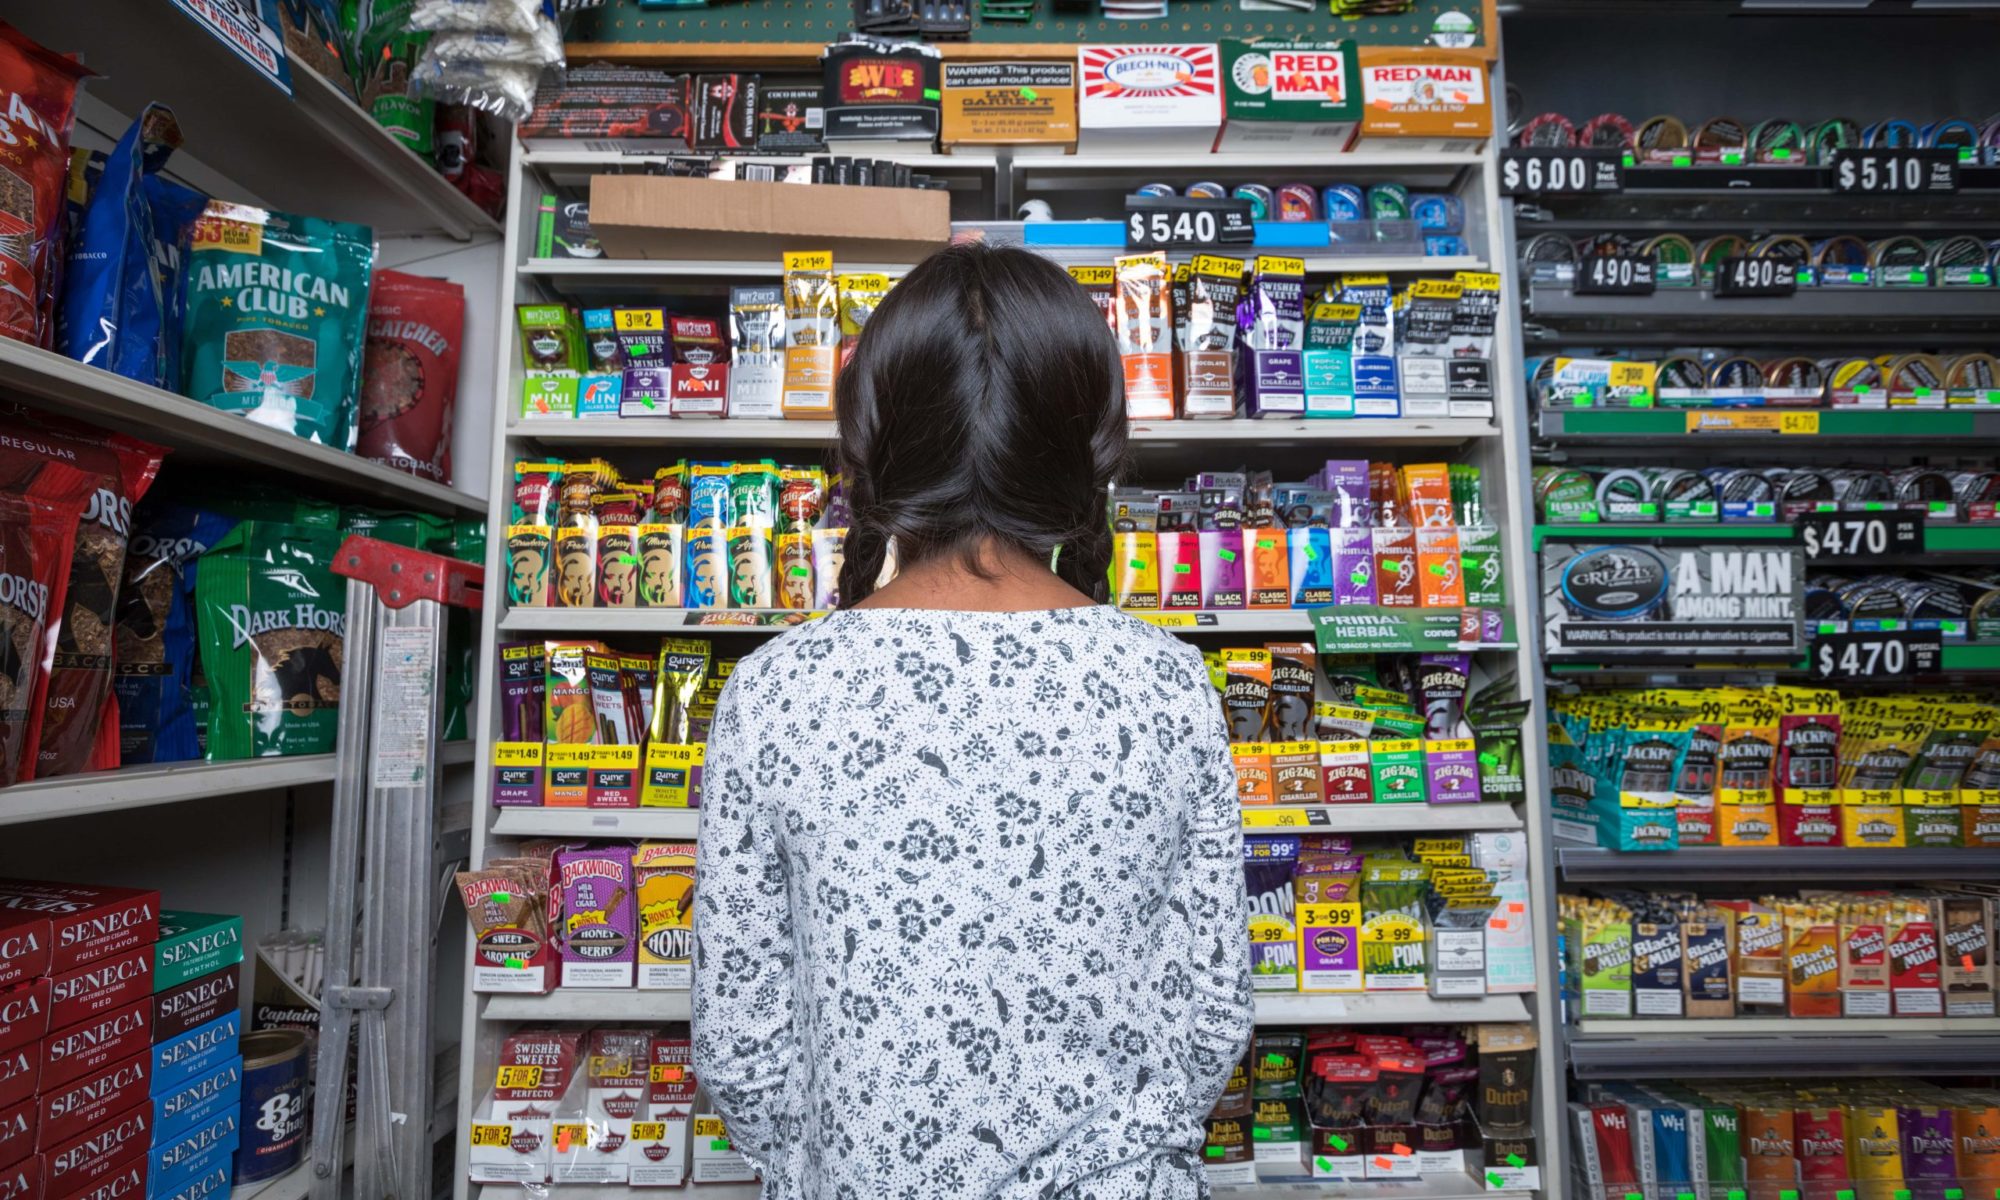 Looking at power wall full of colorful tobacco products in a convenience store from behind a young female child with pigtails